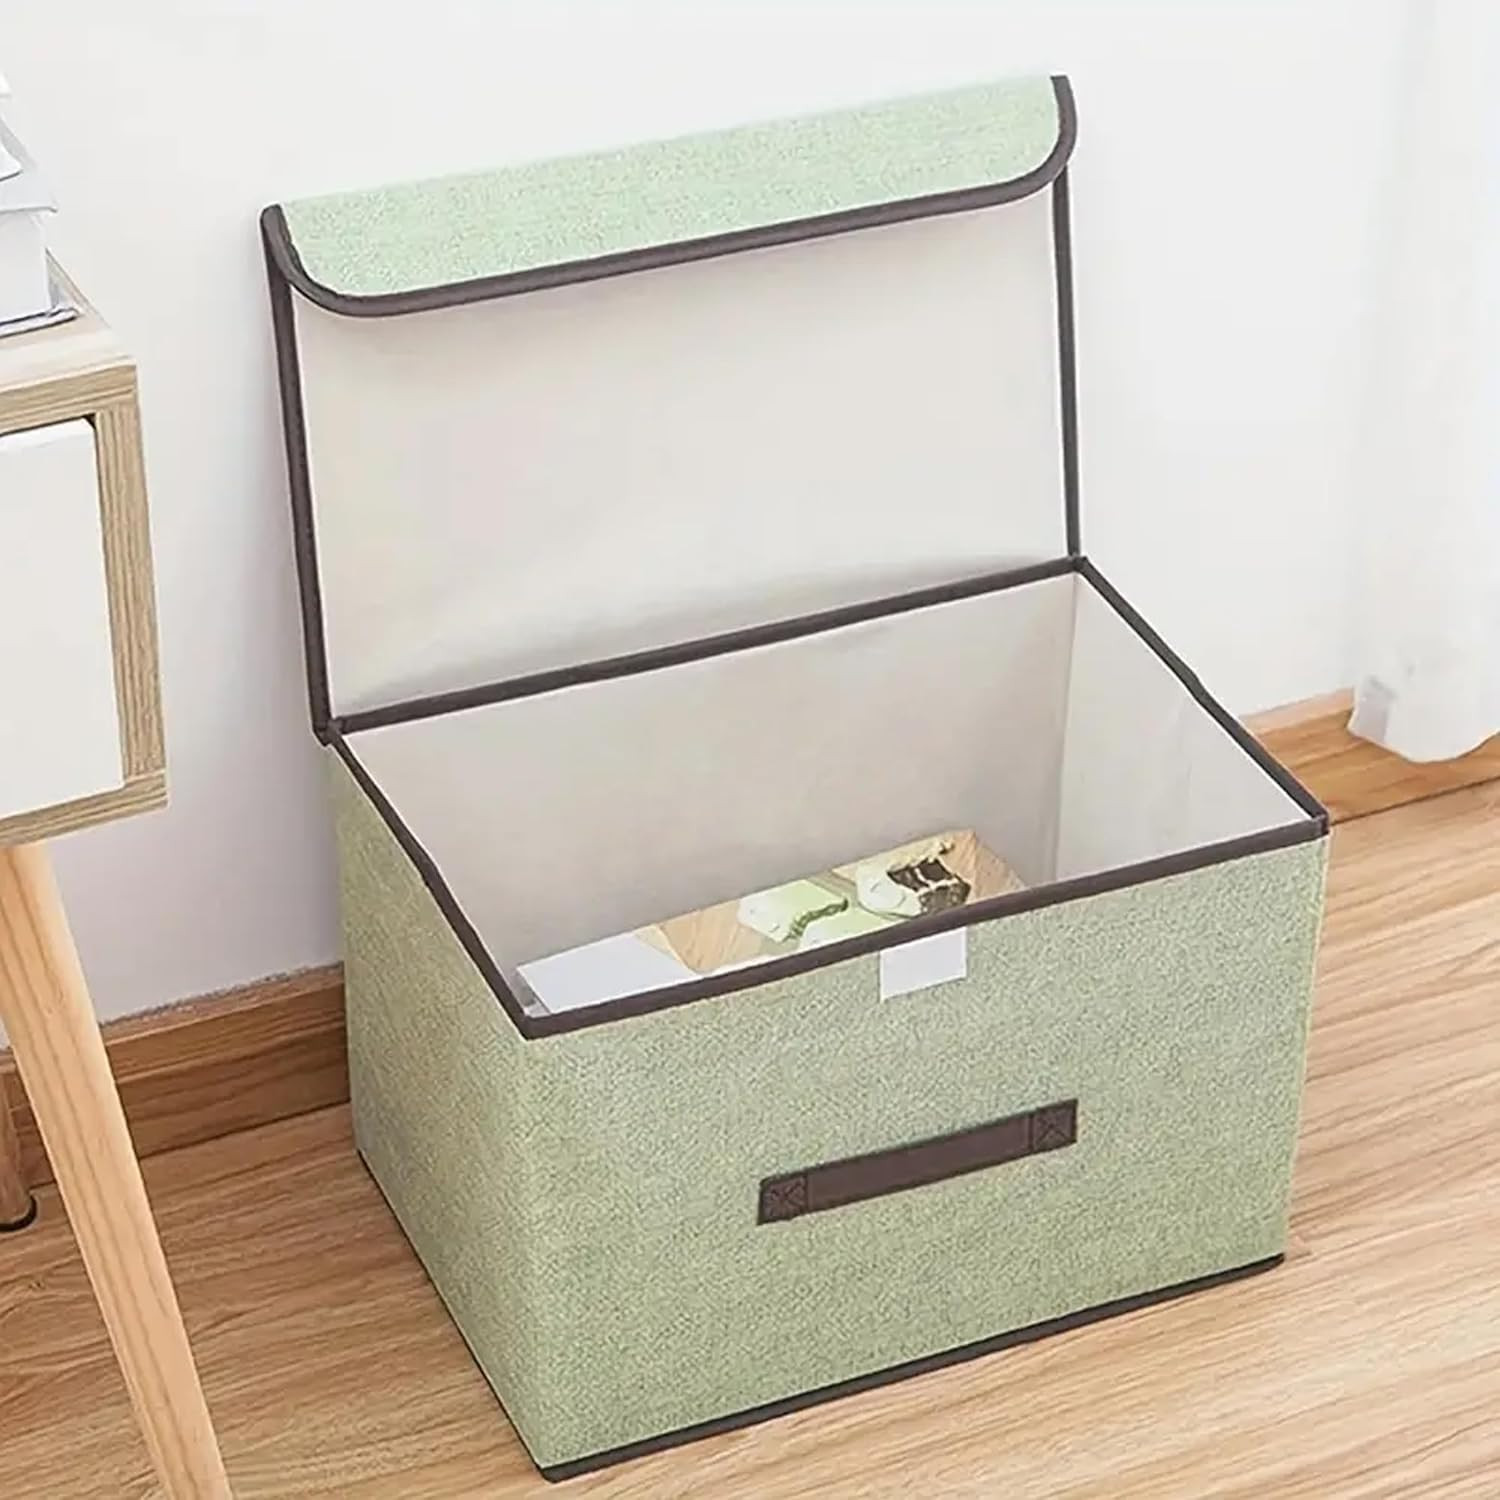 Kuber Industries Large Storage Box With Lid|Foldable Toys Storage Bin|Wardrobe Organizer For clothes|Front Handle & Sturdy (Green)